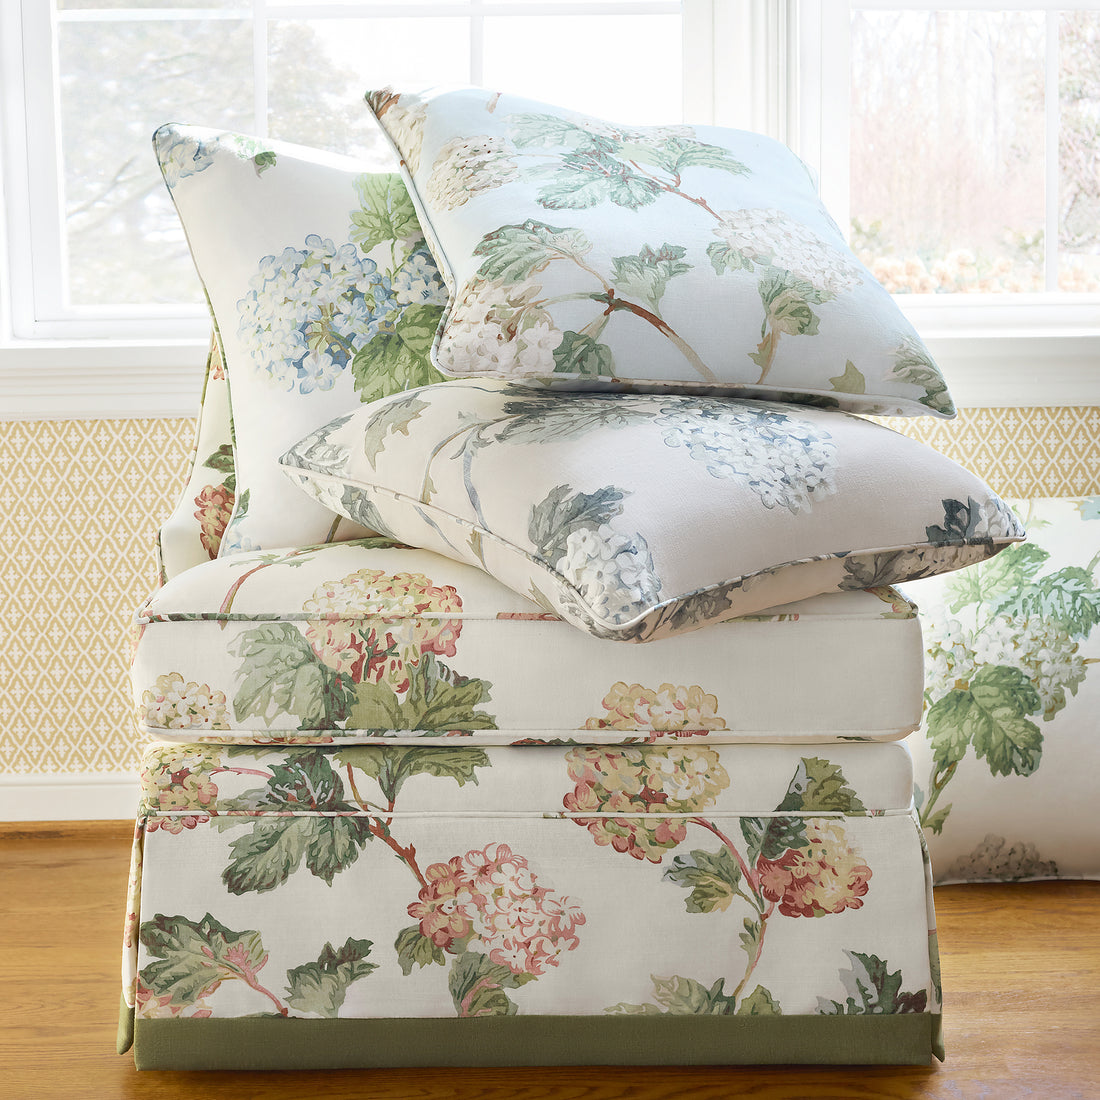 Collection of brentwood chair with skirt and pillow fabrics in Sussex Hydrangea printed fabric featuring slate and linen color fabric - pattern number AF57847 - by Anna French in the Bristol collection